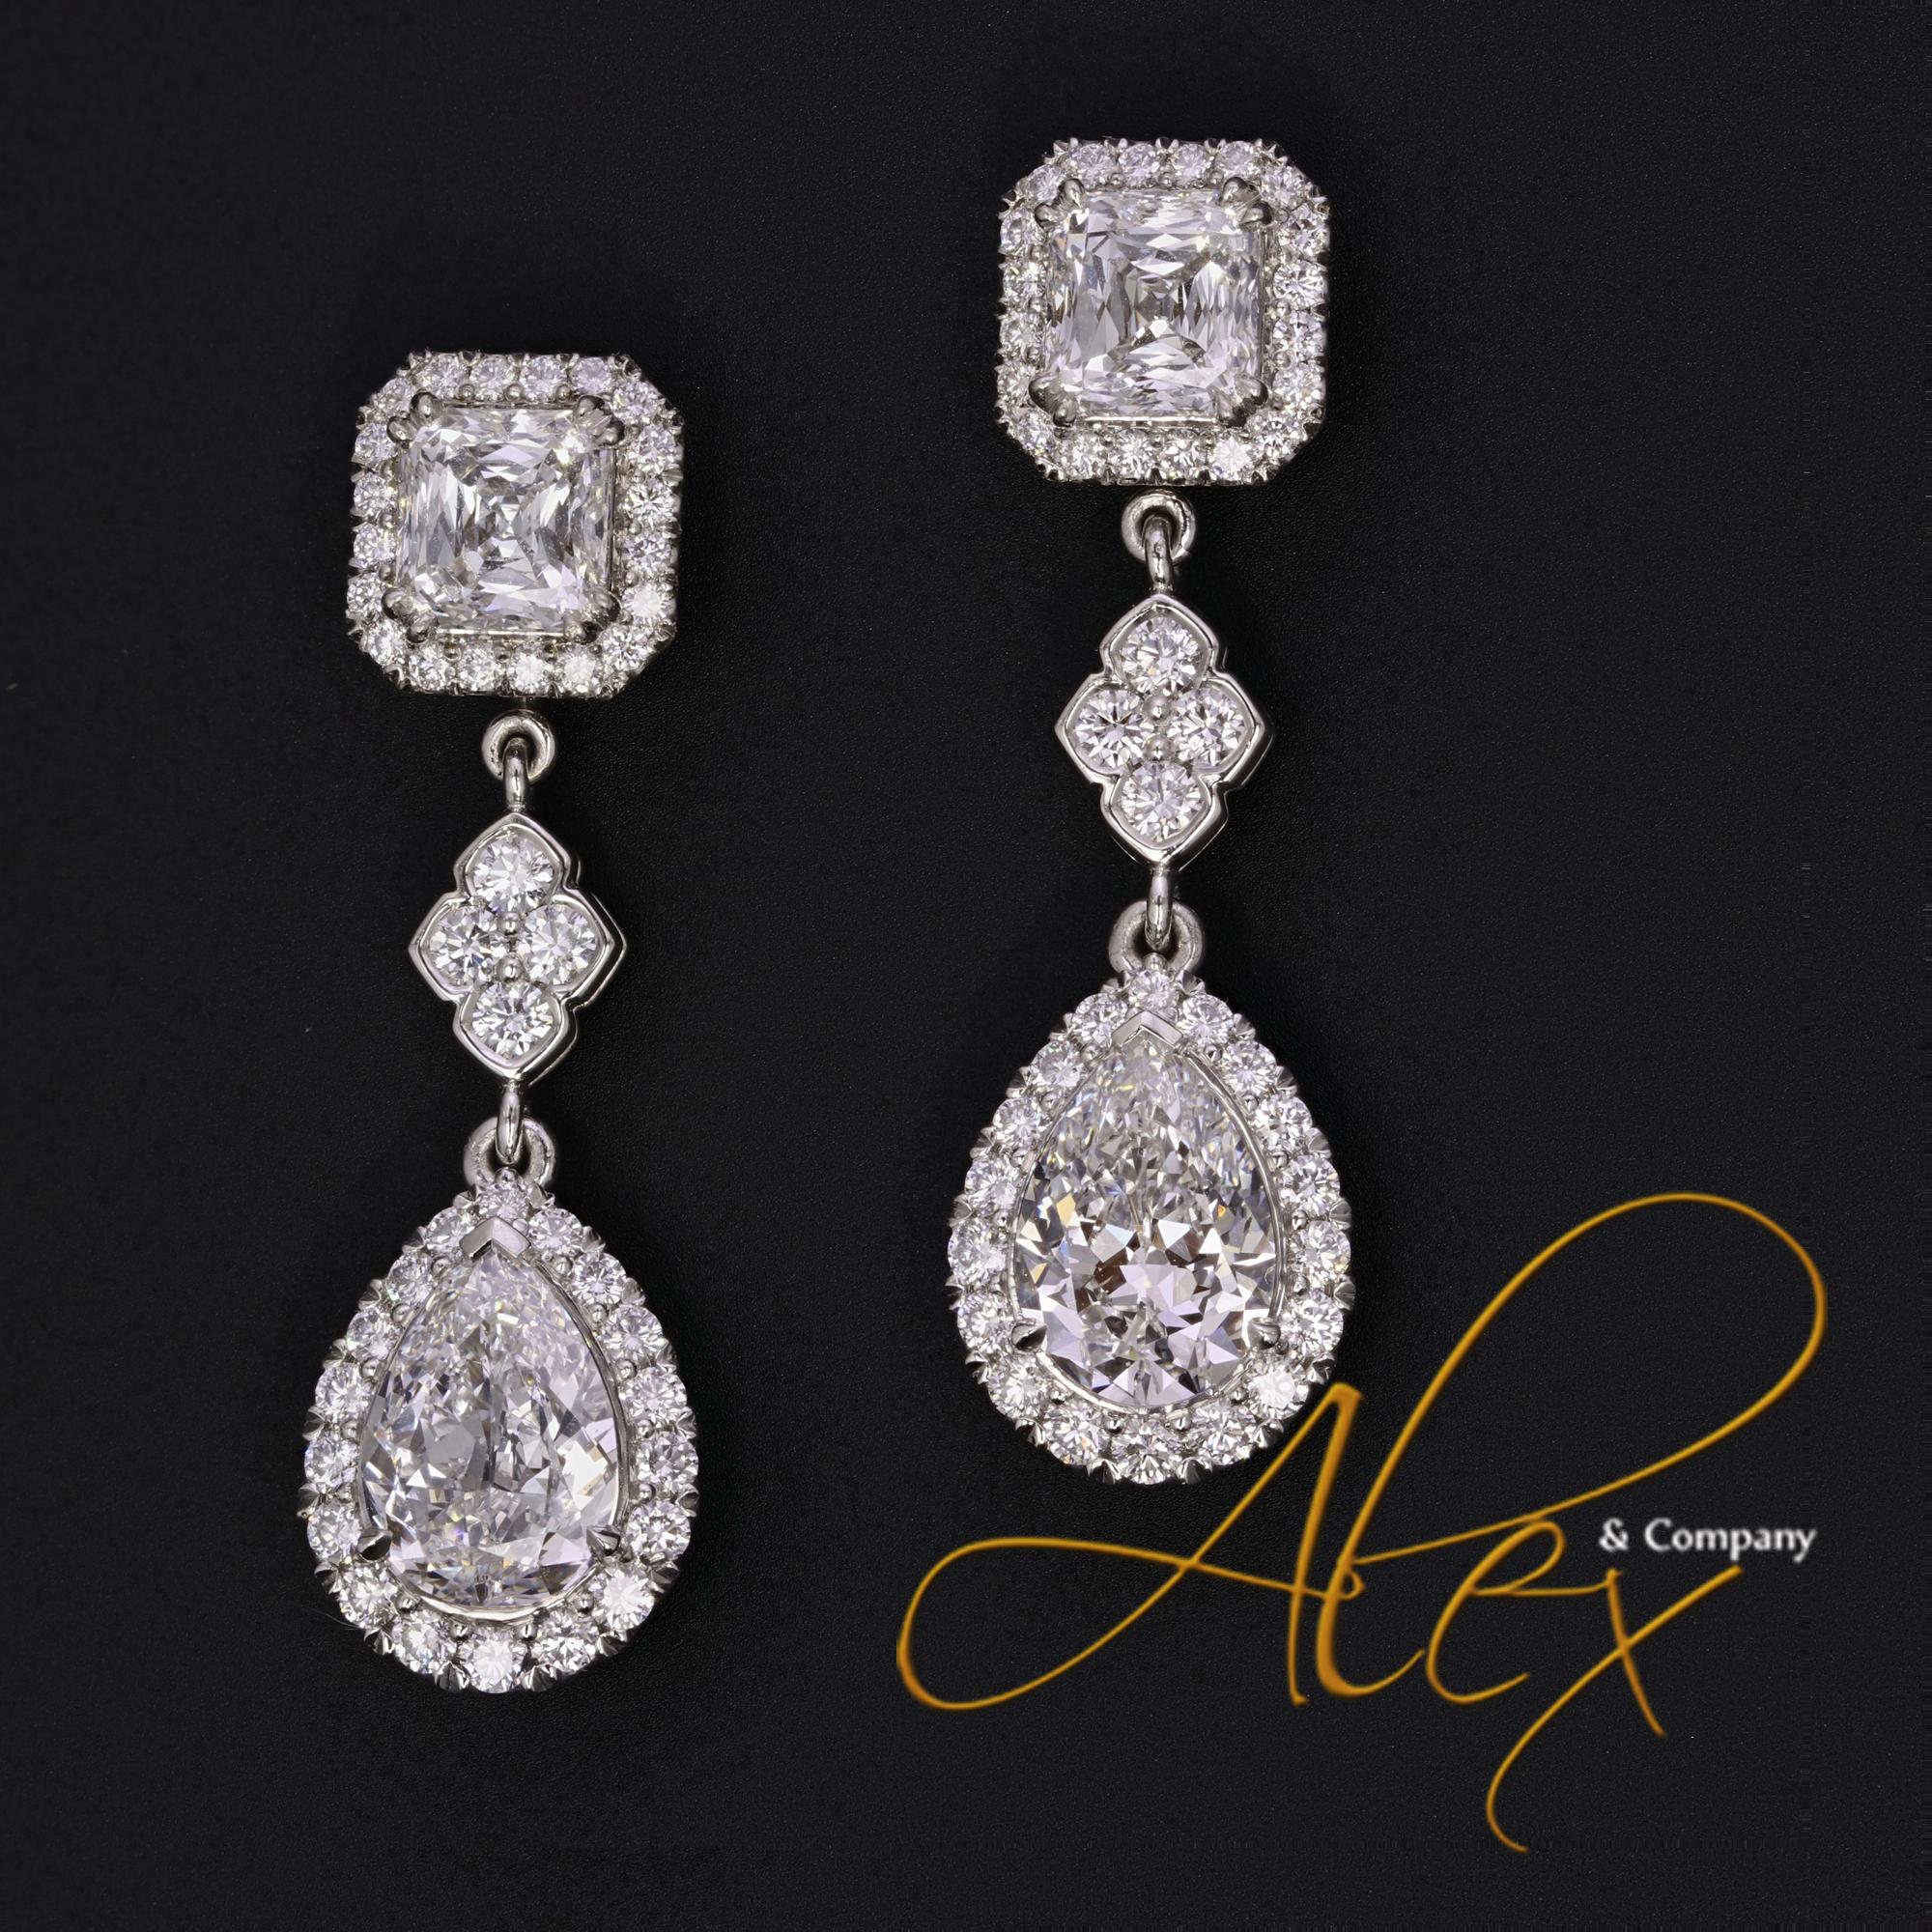 From the exclusive collection at Alex & Co. These breath taking bespoke earrings are a blend of art and design. The top features two prong set asscher cut diamonds totaling 2.10ctw., E-F color, VS2 clarity. The diamonds are surrounded by a halo of